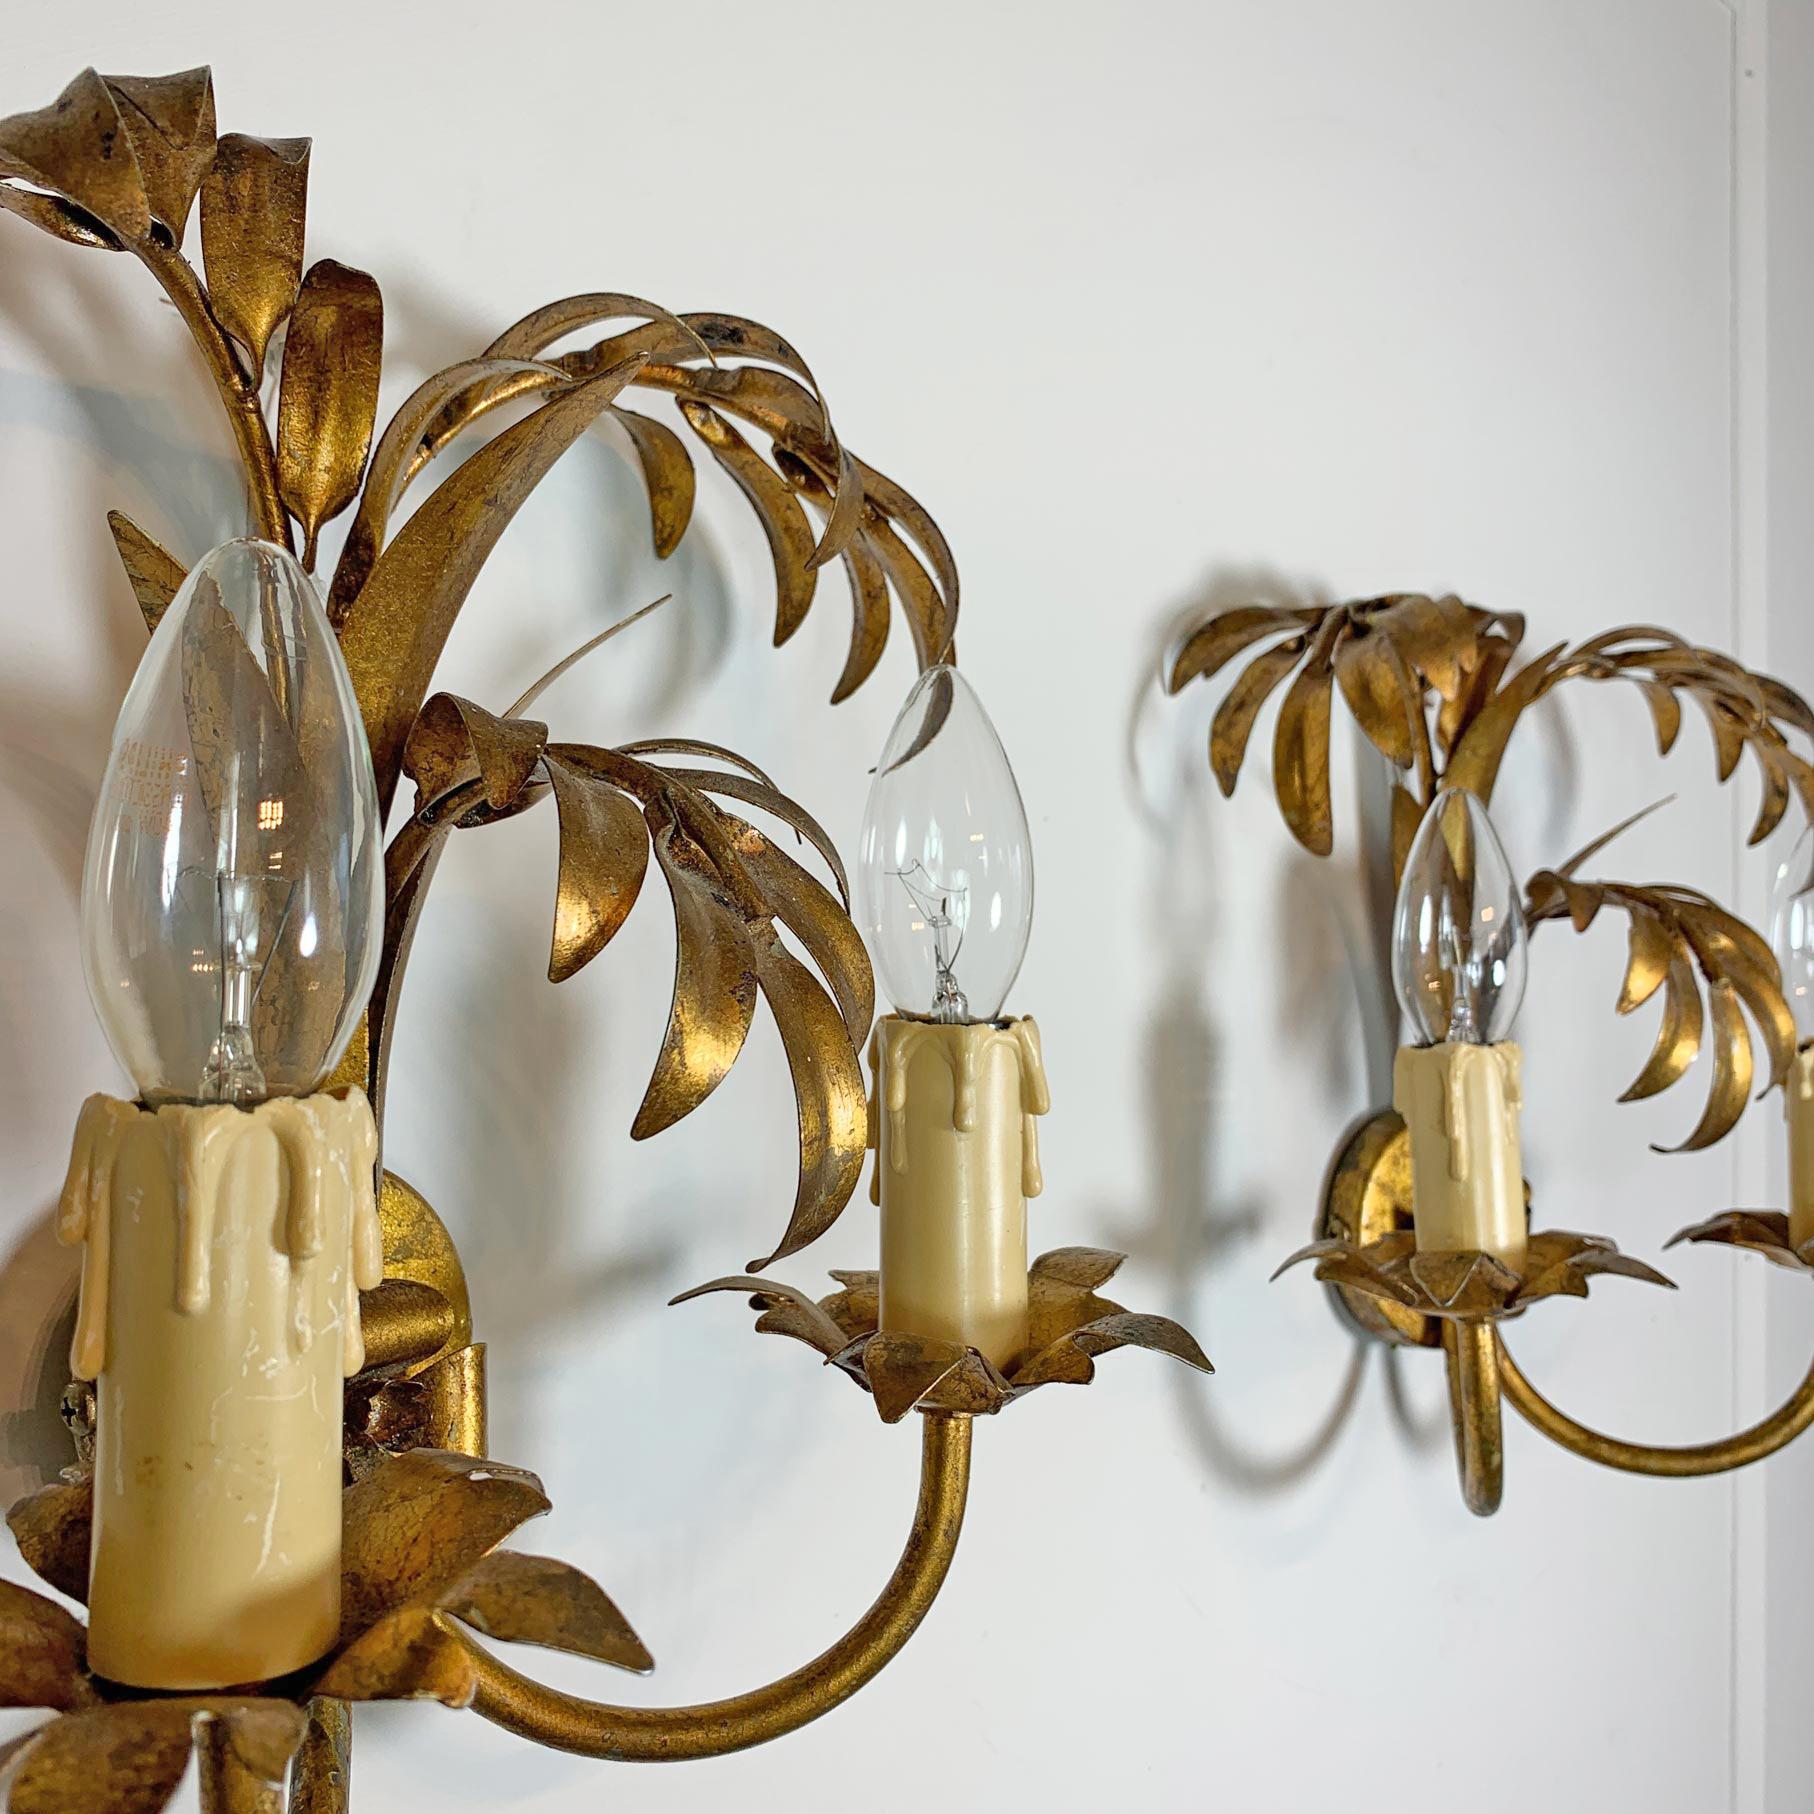 A beautiful pair of gilt metal wall lights, designed by Hans Kogl in the form of palm leaves, each light has two e14 (small screw in) lamp holders, dating to the 1970’s.

Height 28cm x Width 28cm x Depth 18cm
Back Plate is 7.5cm across 